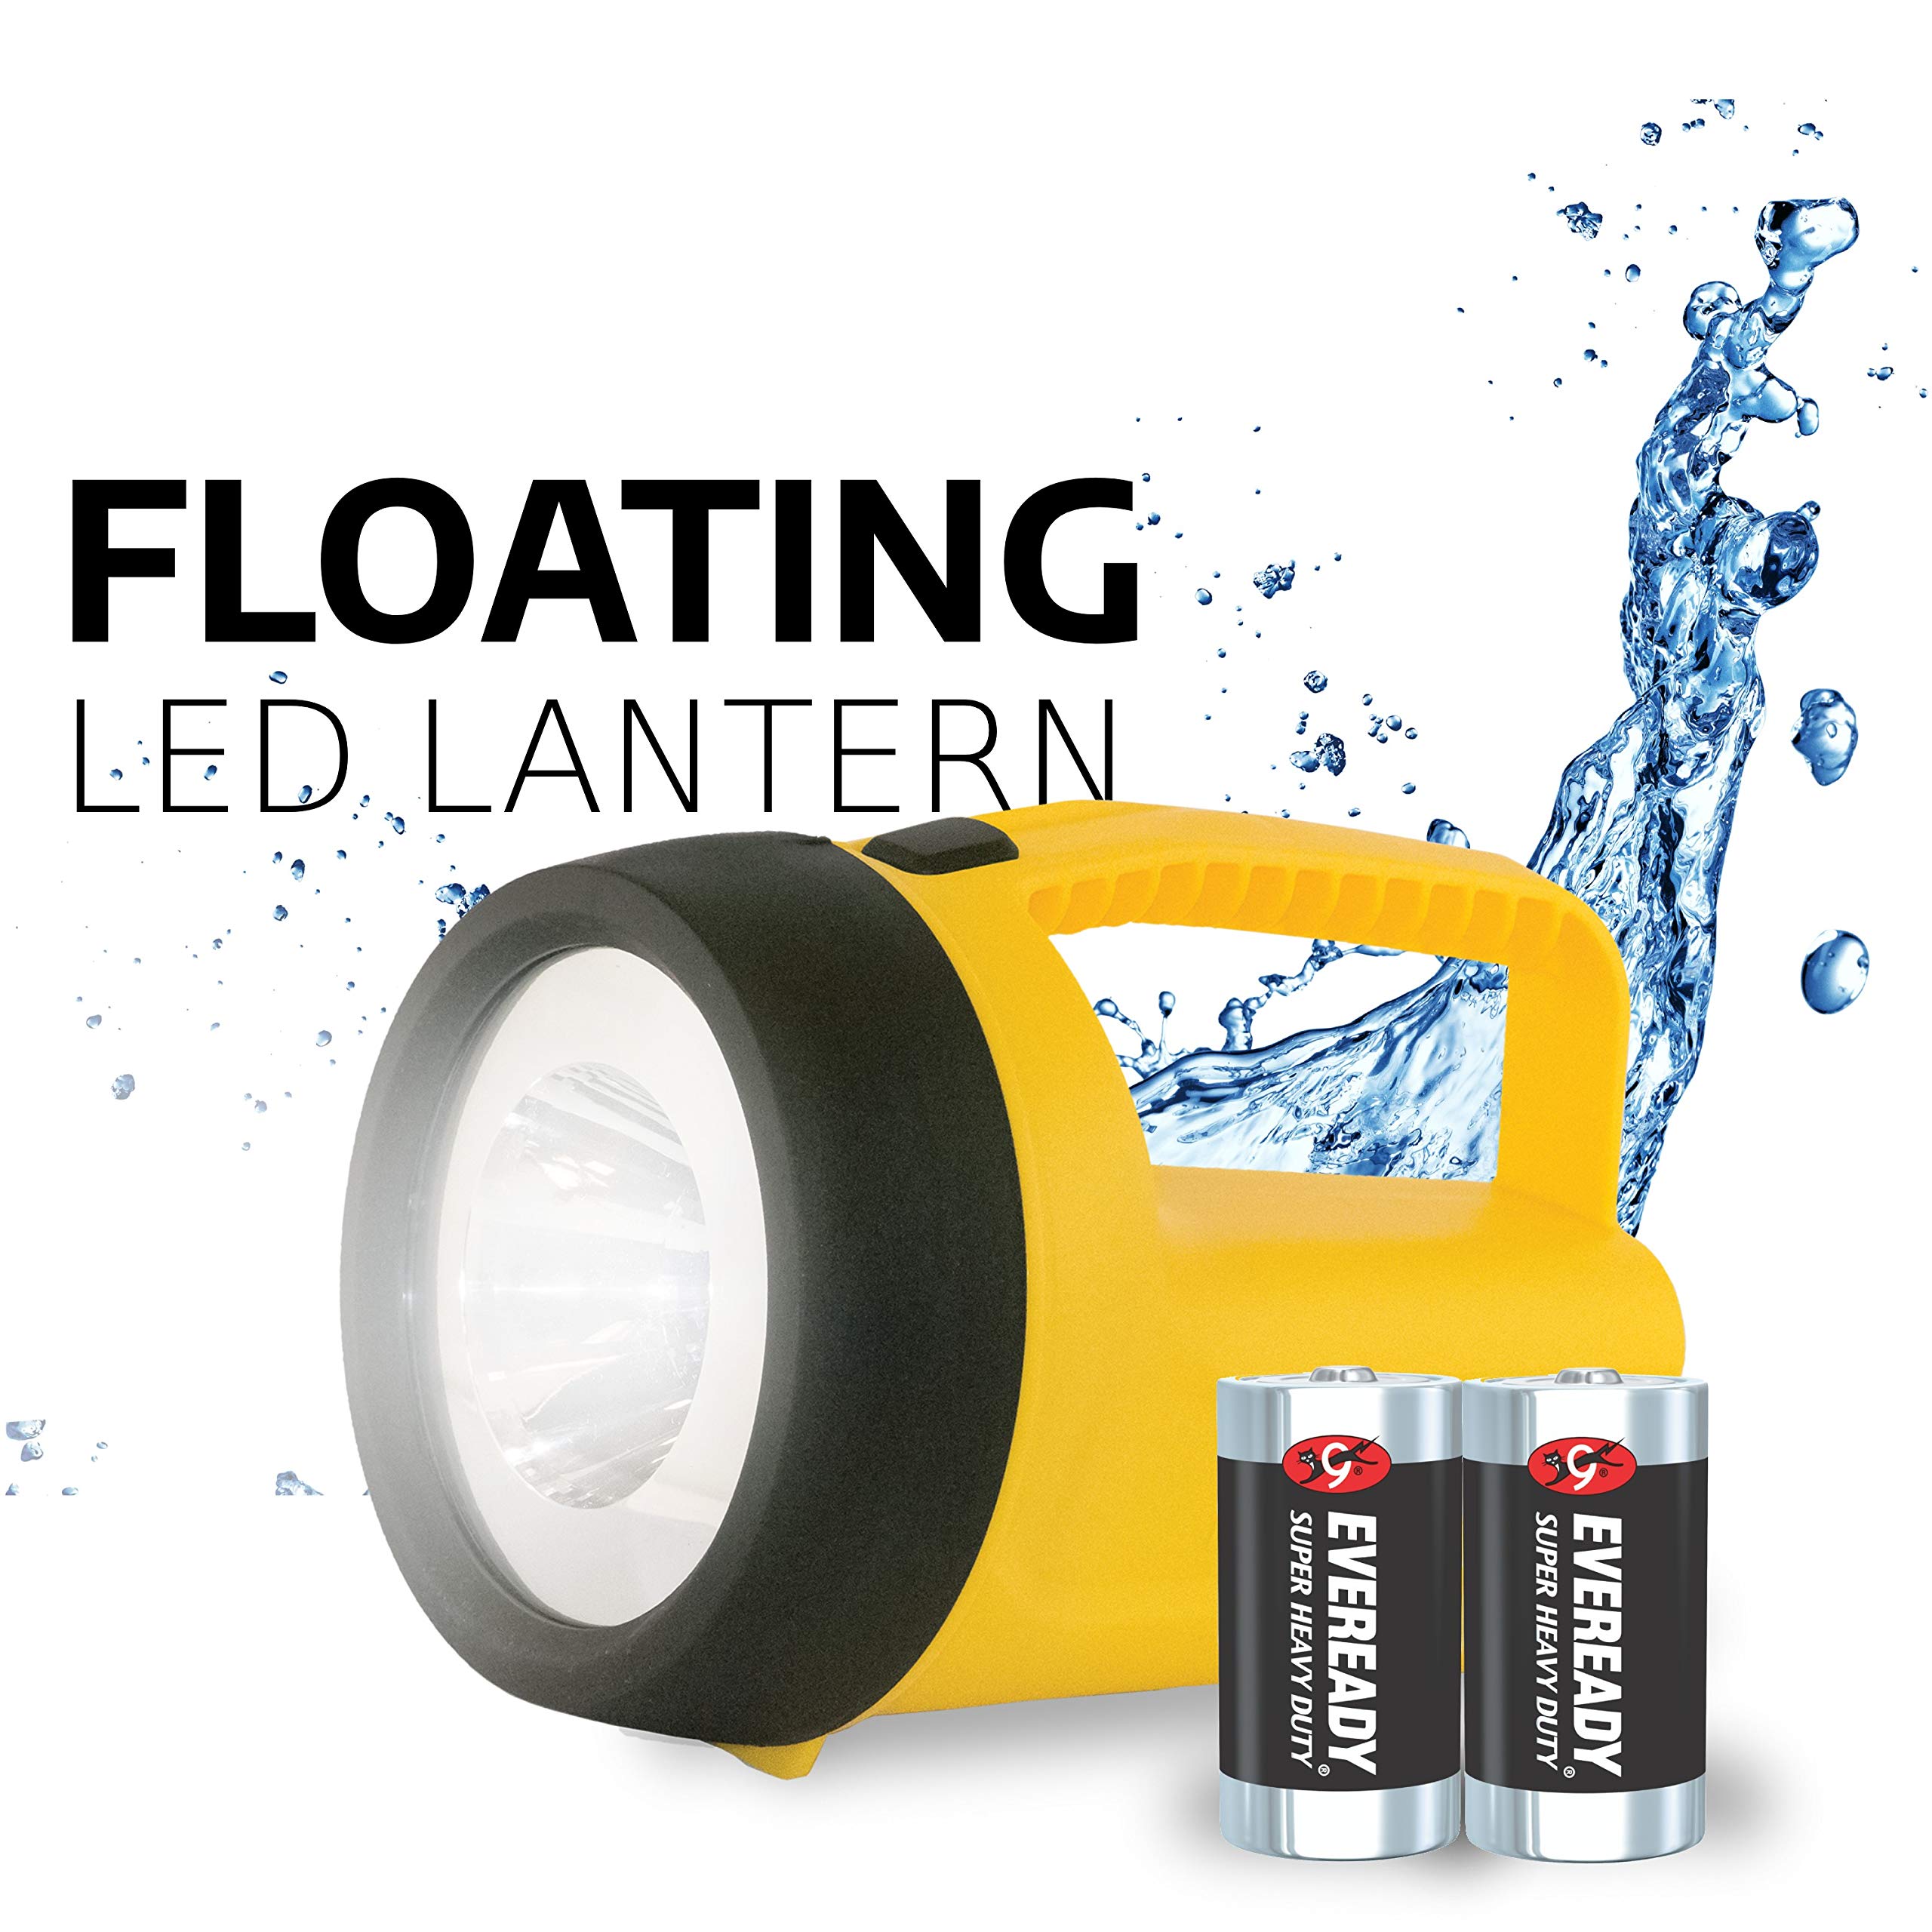 Eveready LED Floating Lantern Flashlight, Battery Powered LED Lanterns for Hurricane Supplies, Survival Kits, Camping Accessories, Power Outages, Batteries Included